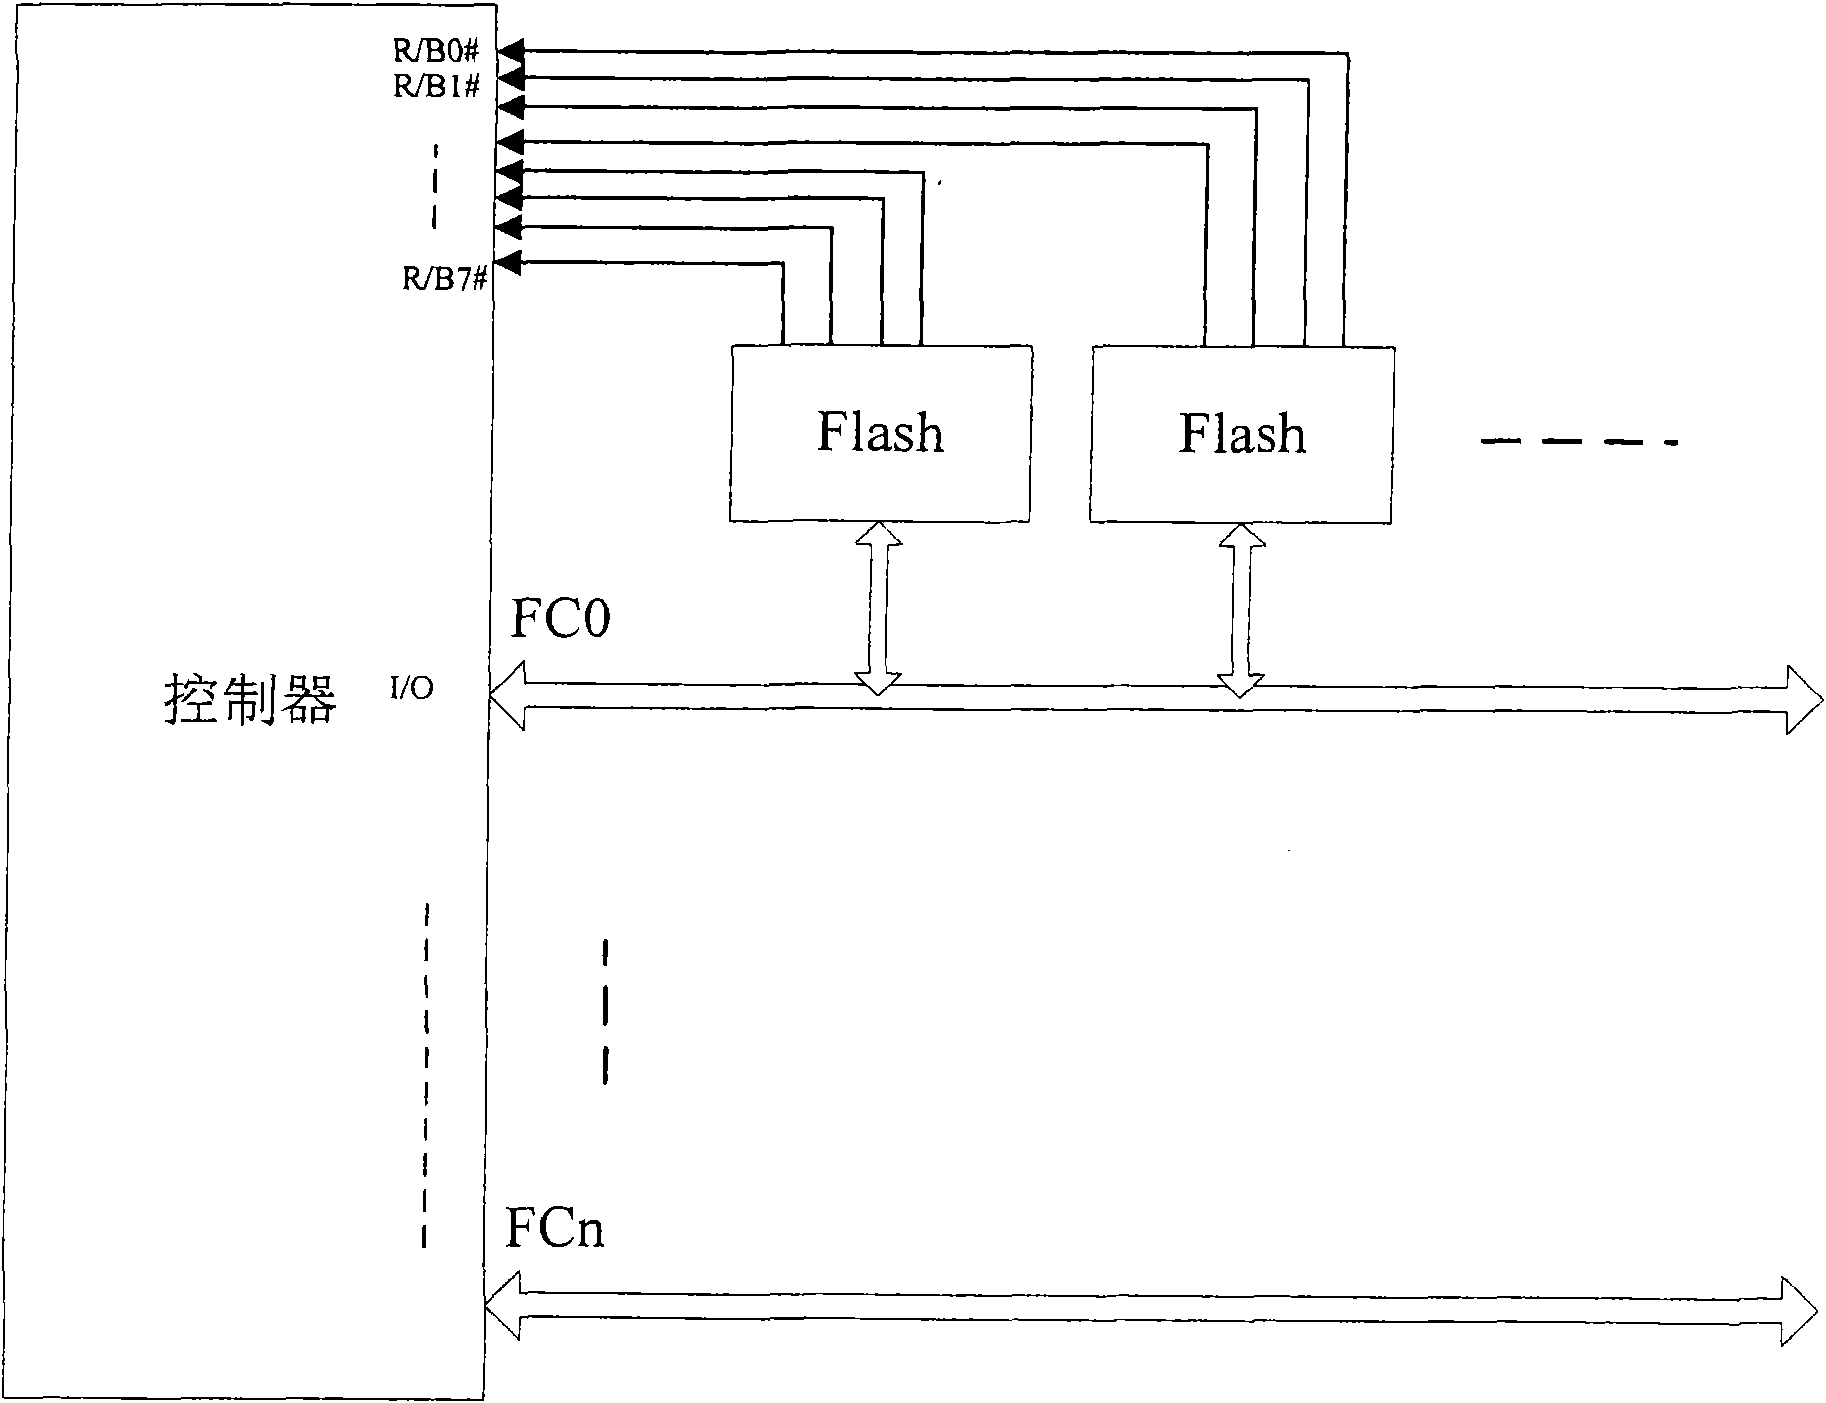 Method, device and system for inquiring state based on Flash